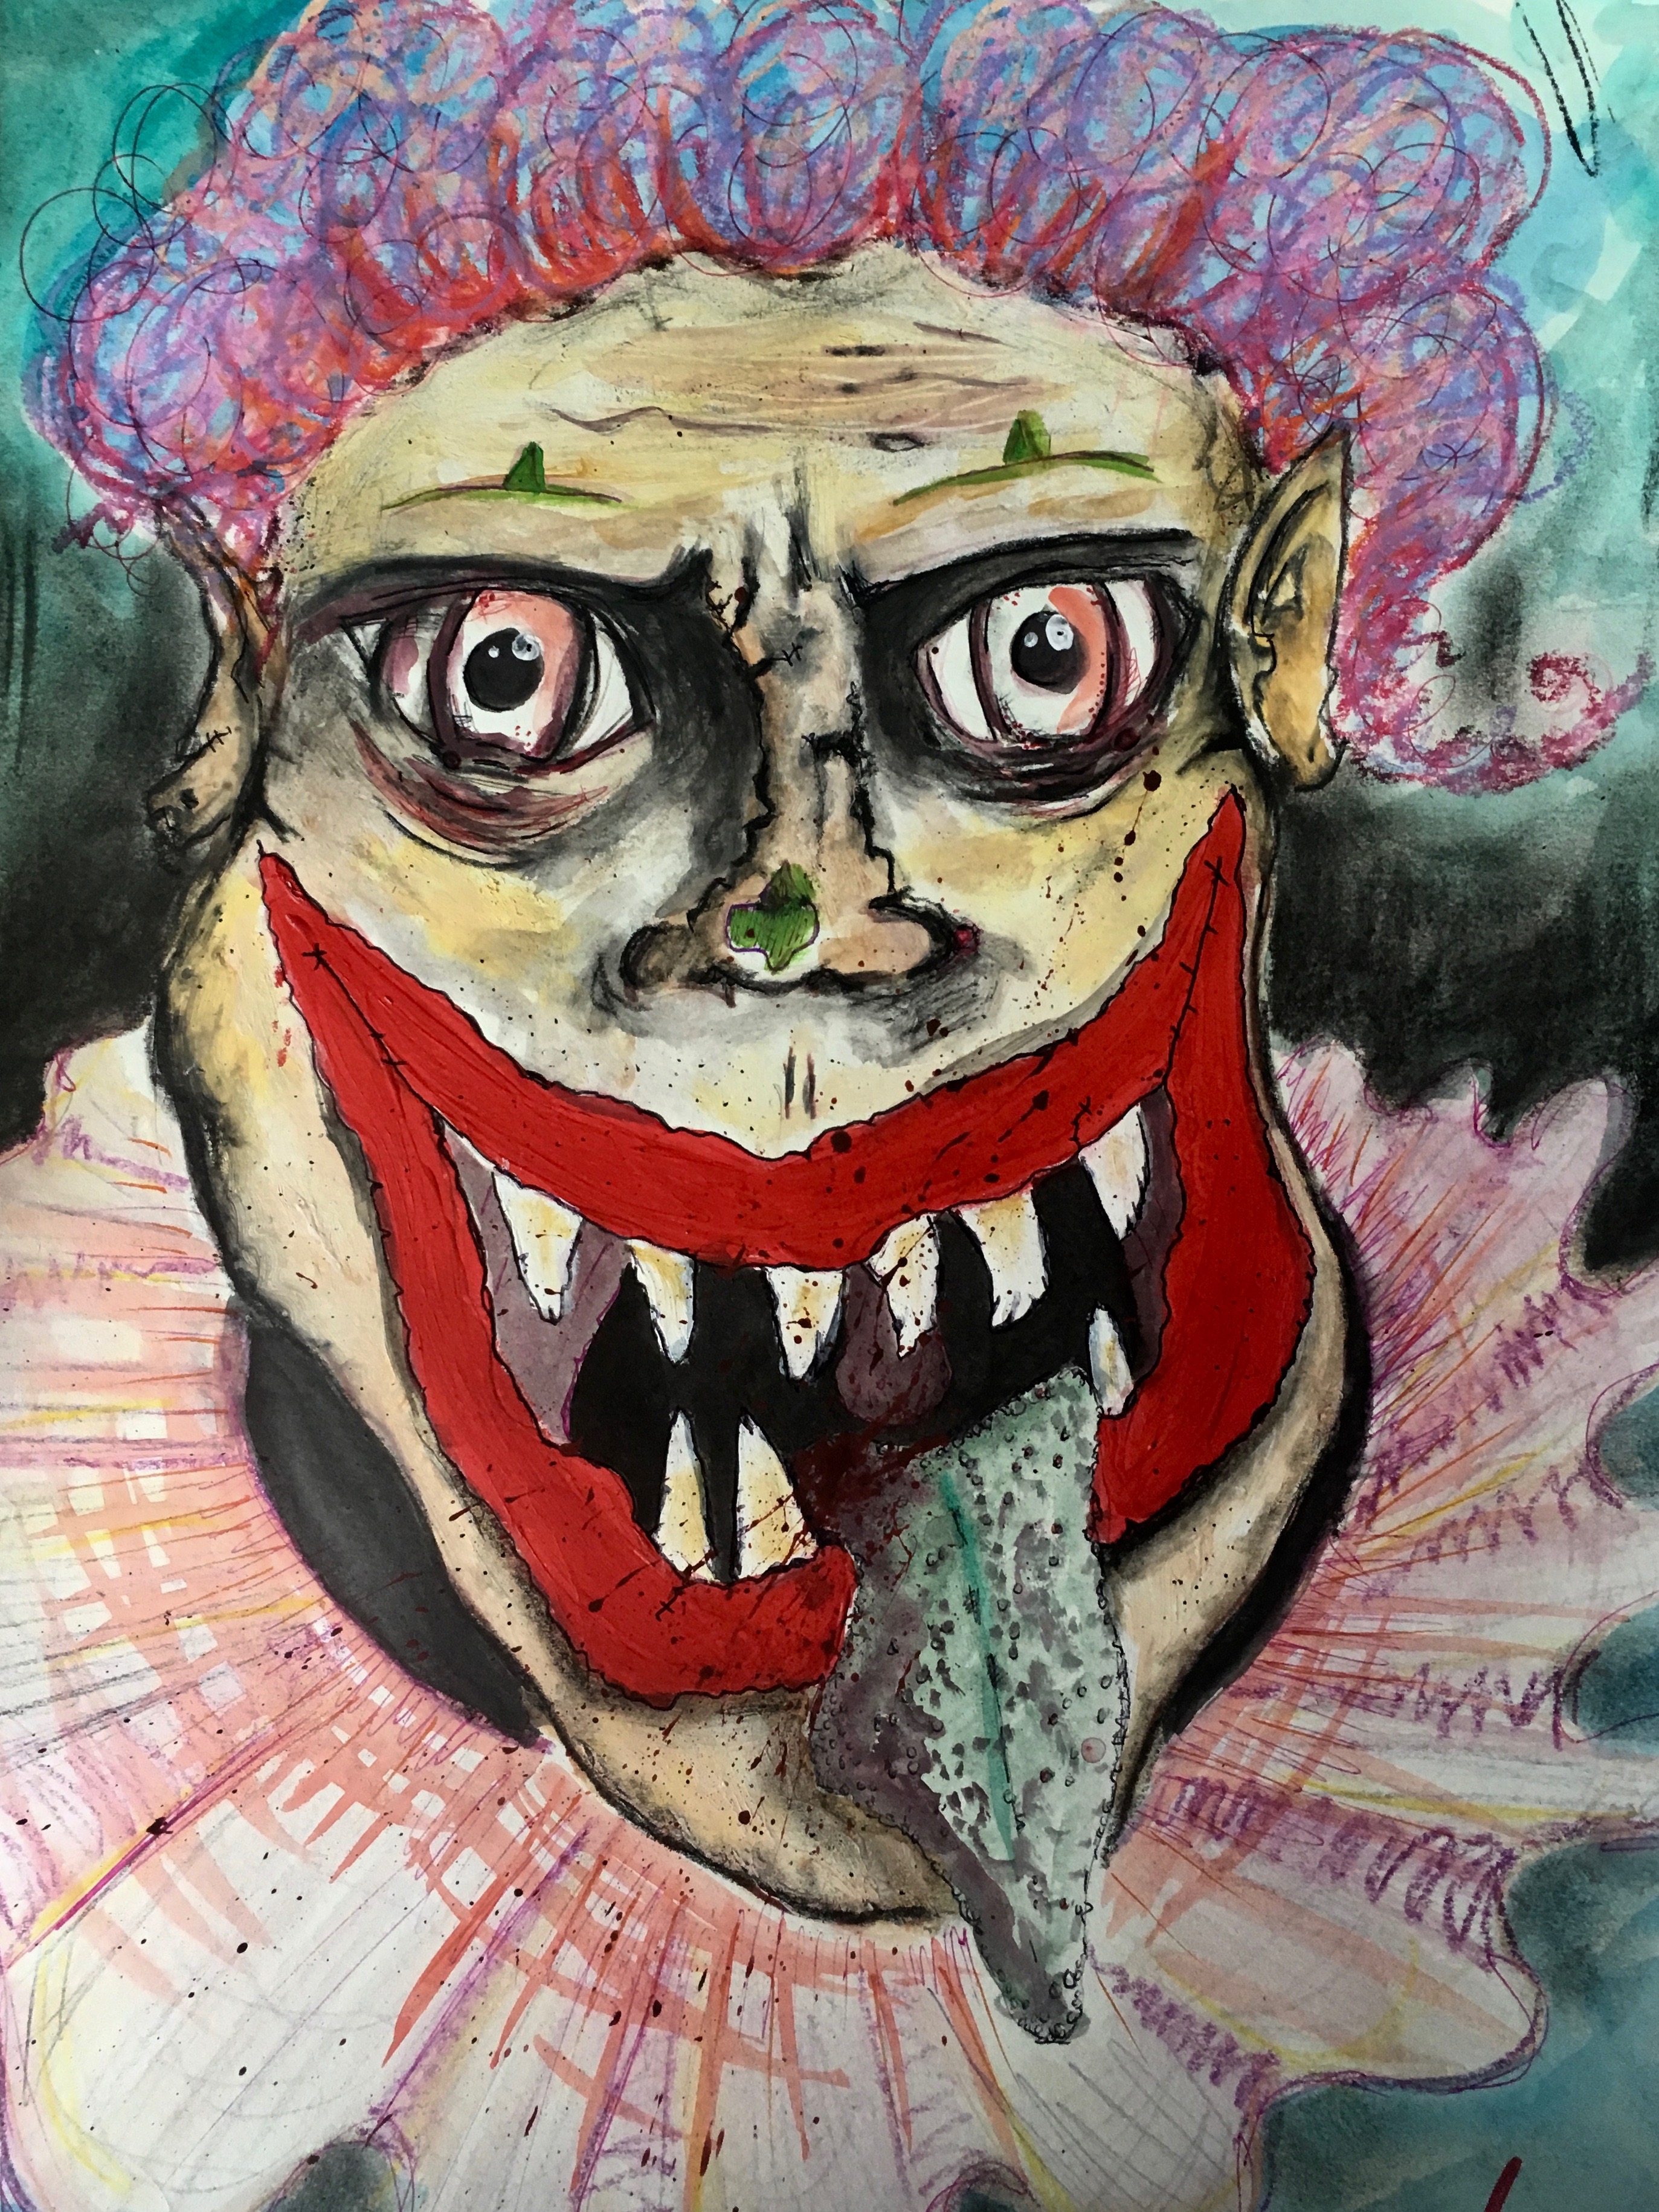 My scary clown drawing with video - Steemit